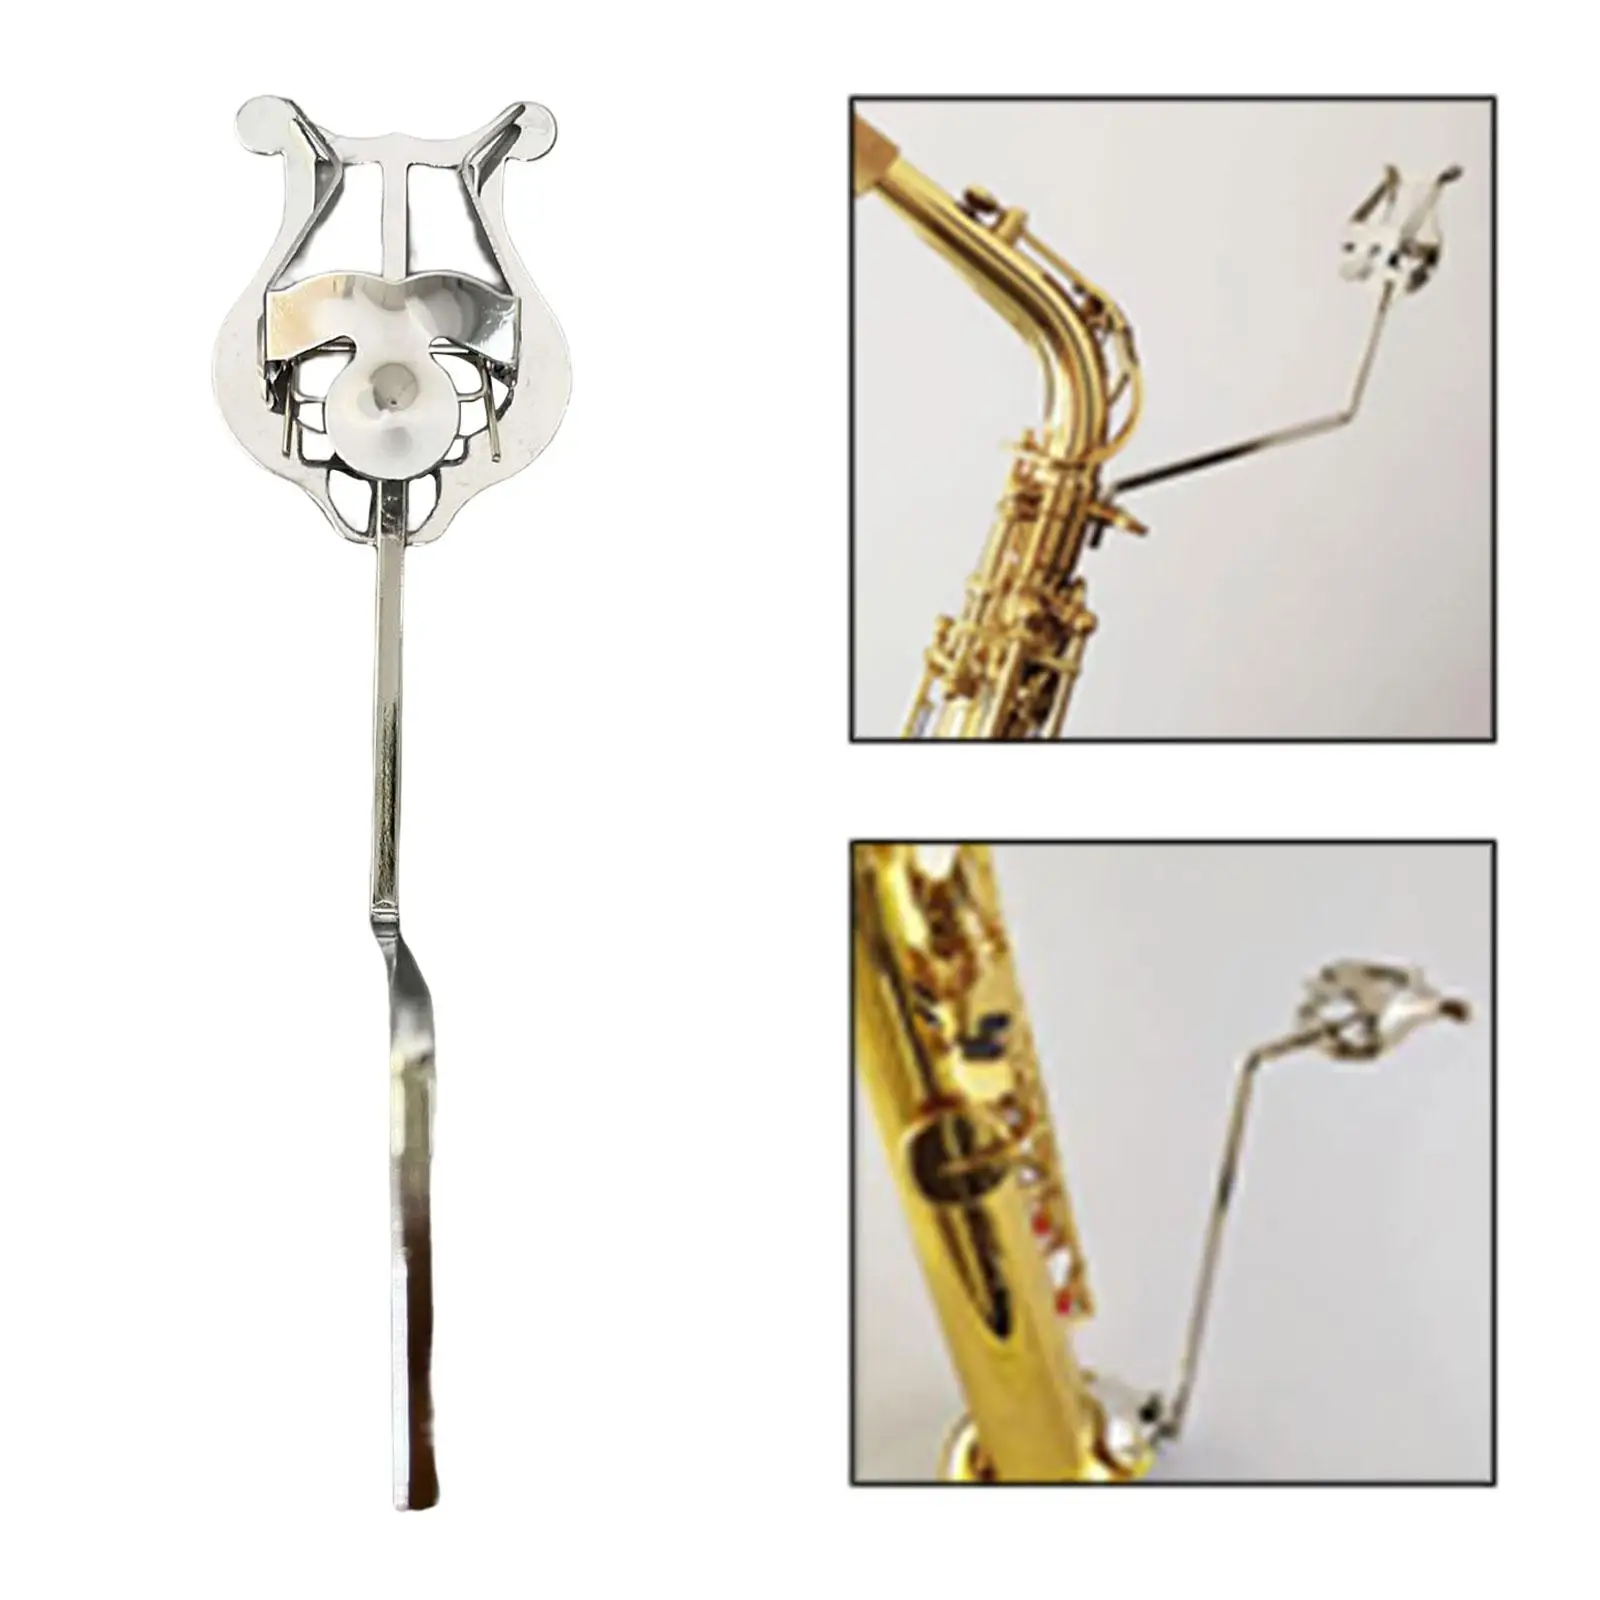 Portable Saxophone Sheet Music Clip Trumpet Marching Clamp Lyre Sheet Music Clip Holder for Sax Tenor Accessories Replacements